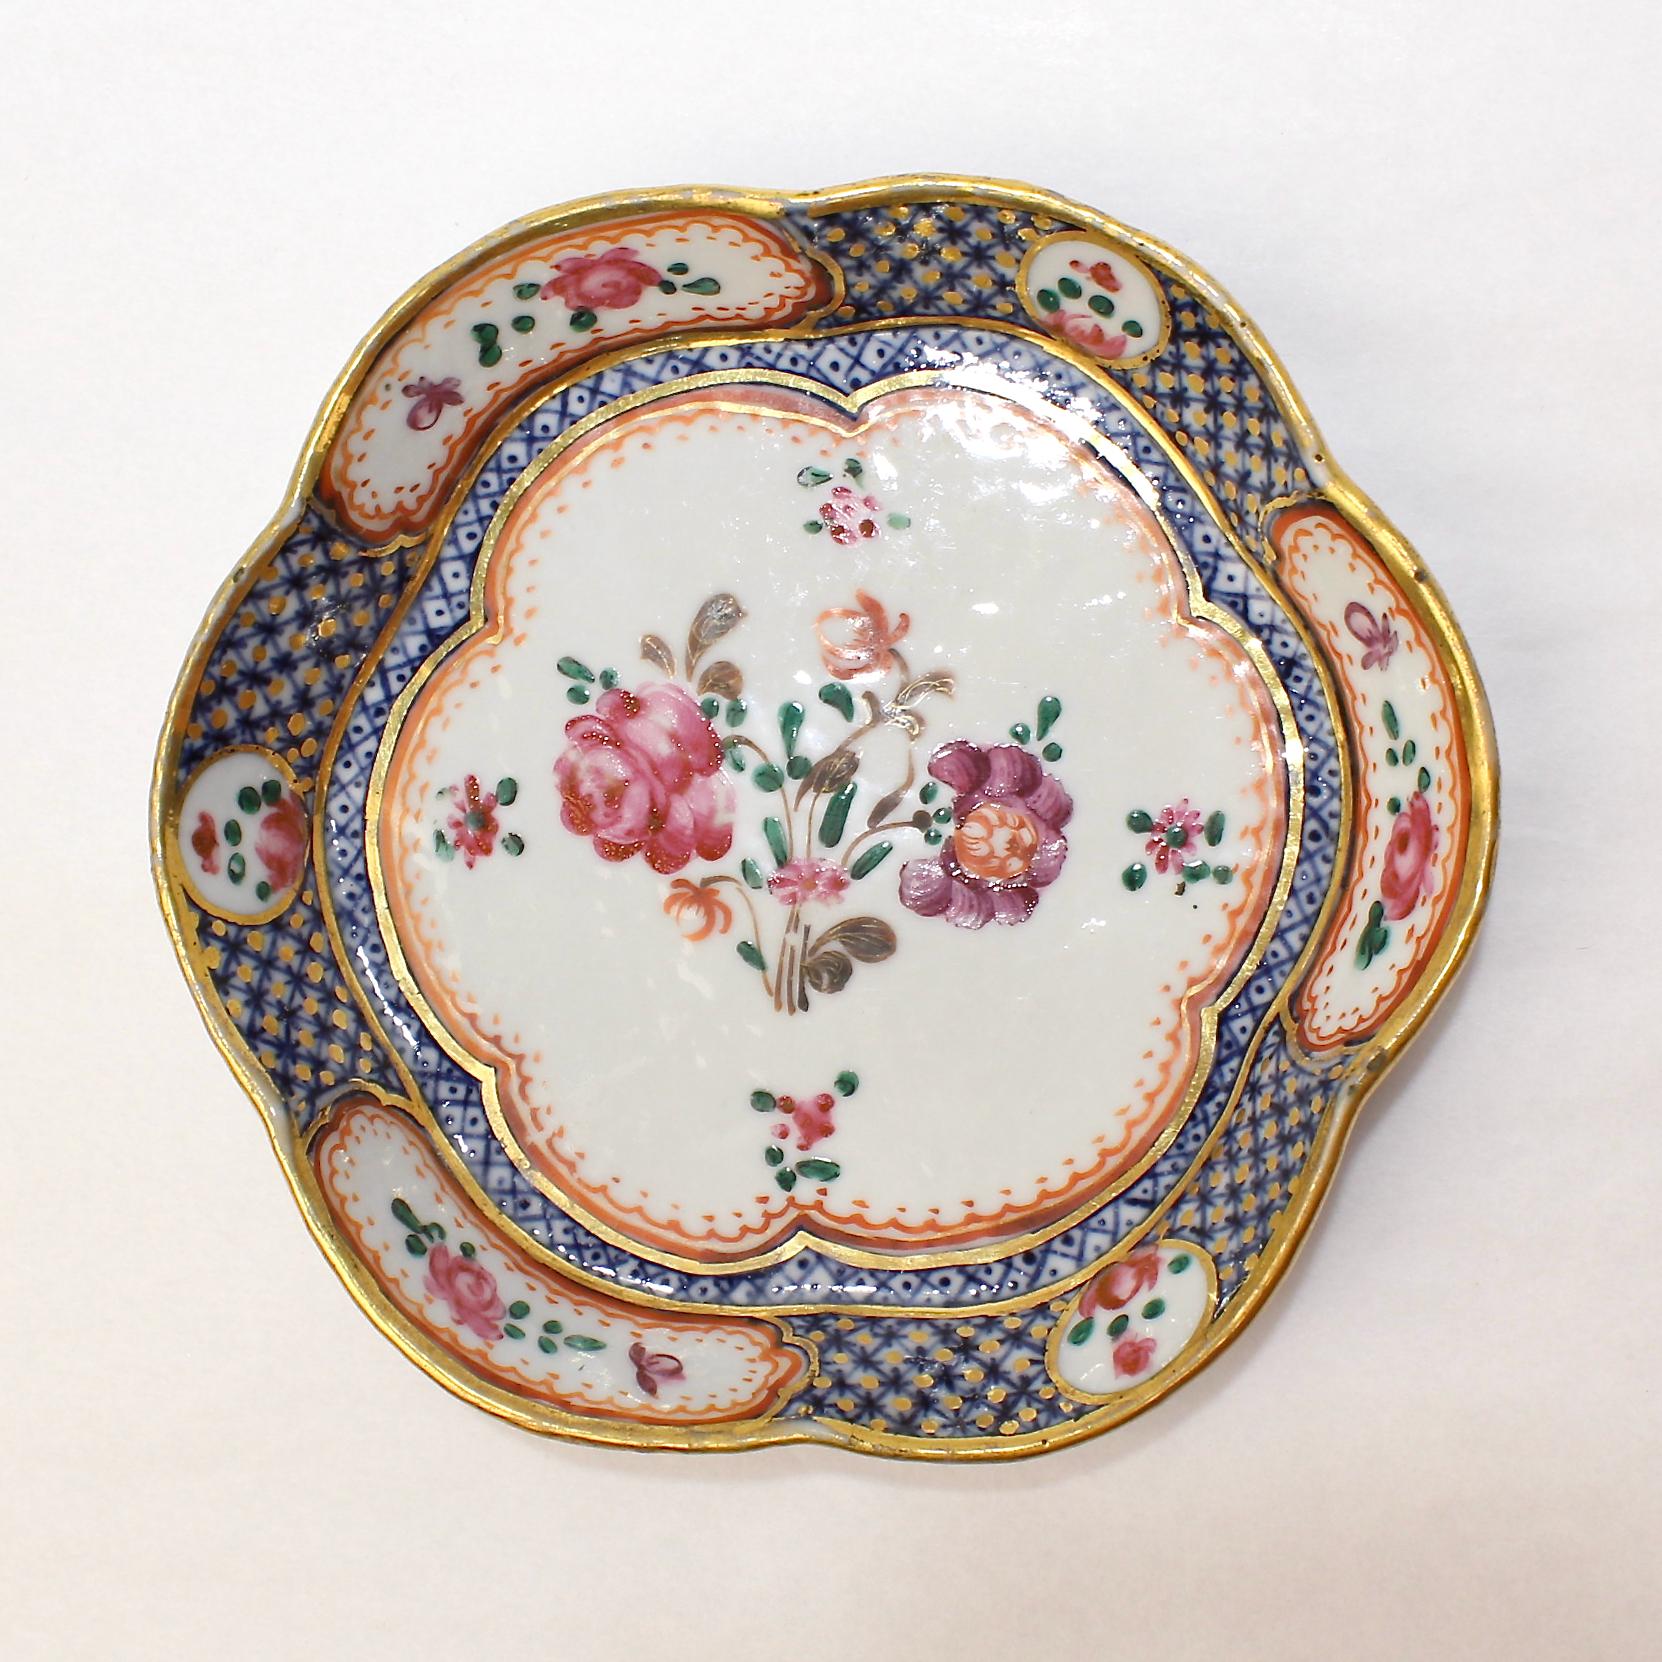 19th Century Antique Famille Rose Chinese Export Porcelain Bowl or Dish For Sale